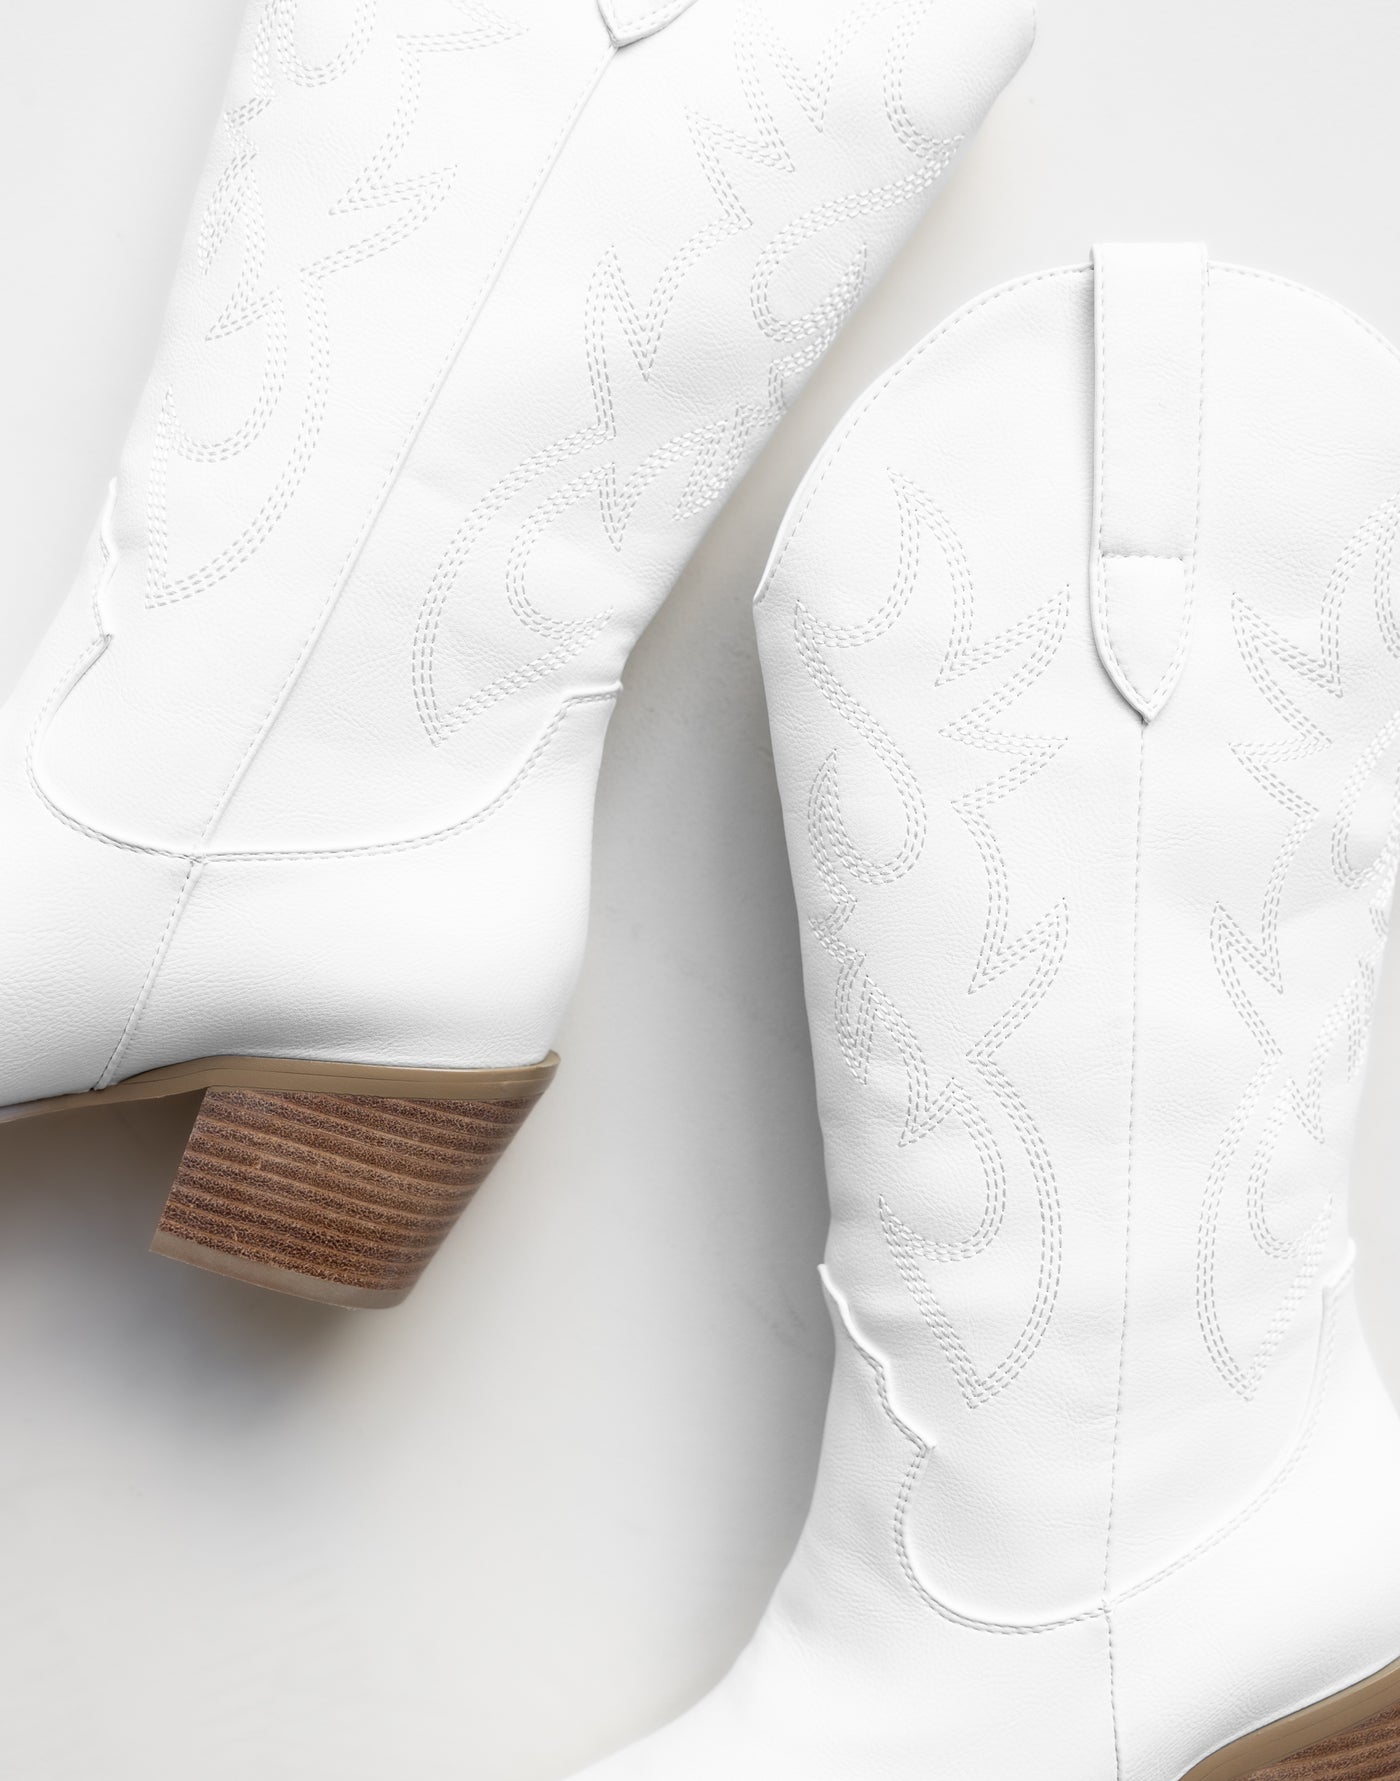 Danaro Boots (White) - By Billini - Western Cowboy Pointed Toe Boots - Women's Shoes - Charcoal Clothing